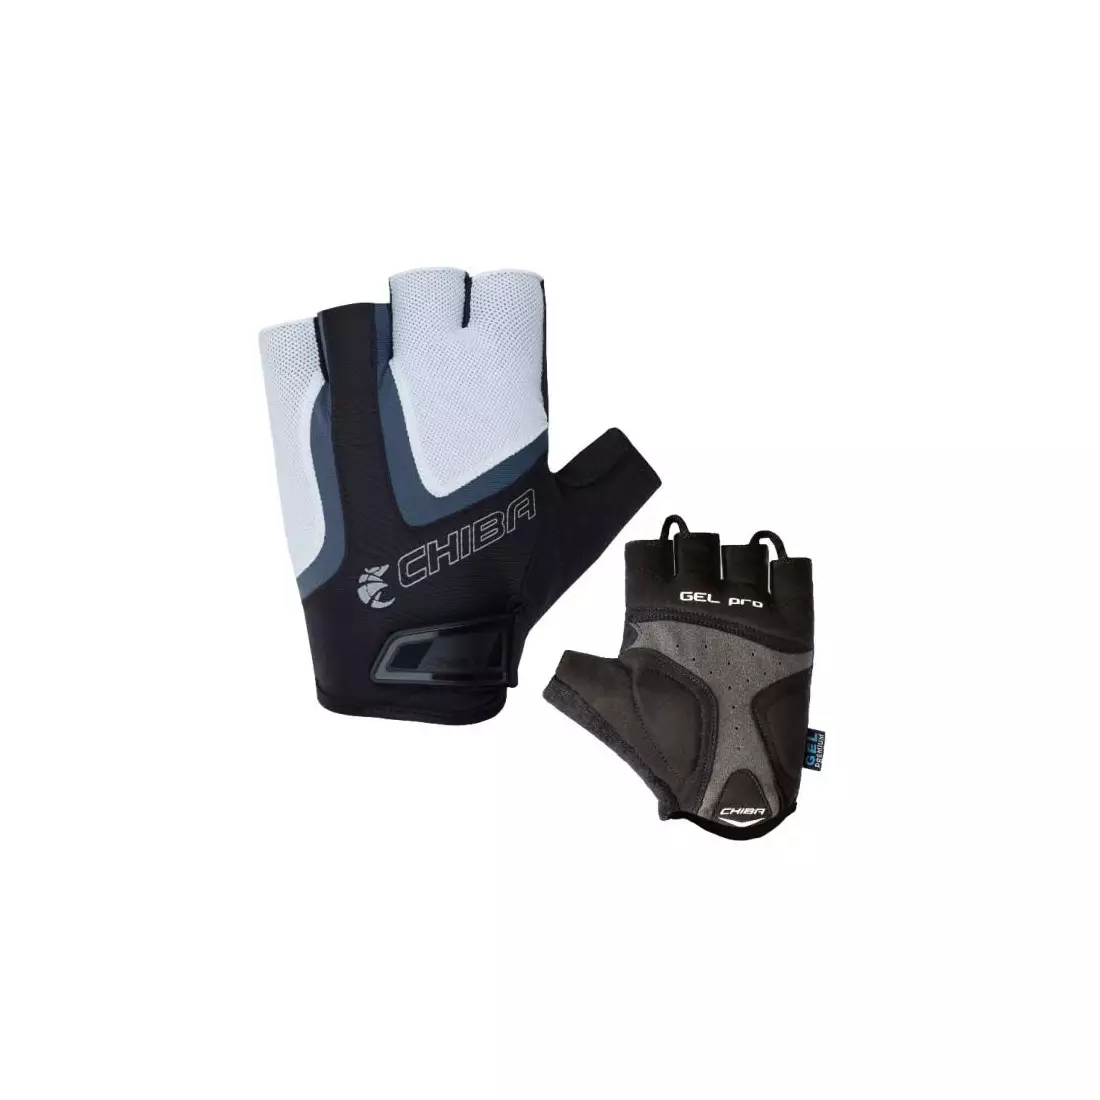 CHIBA GEL AIR cycling gloves, black and white